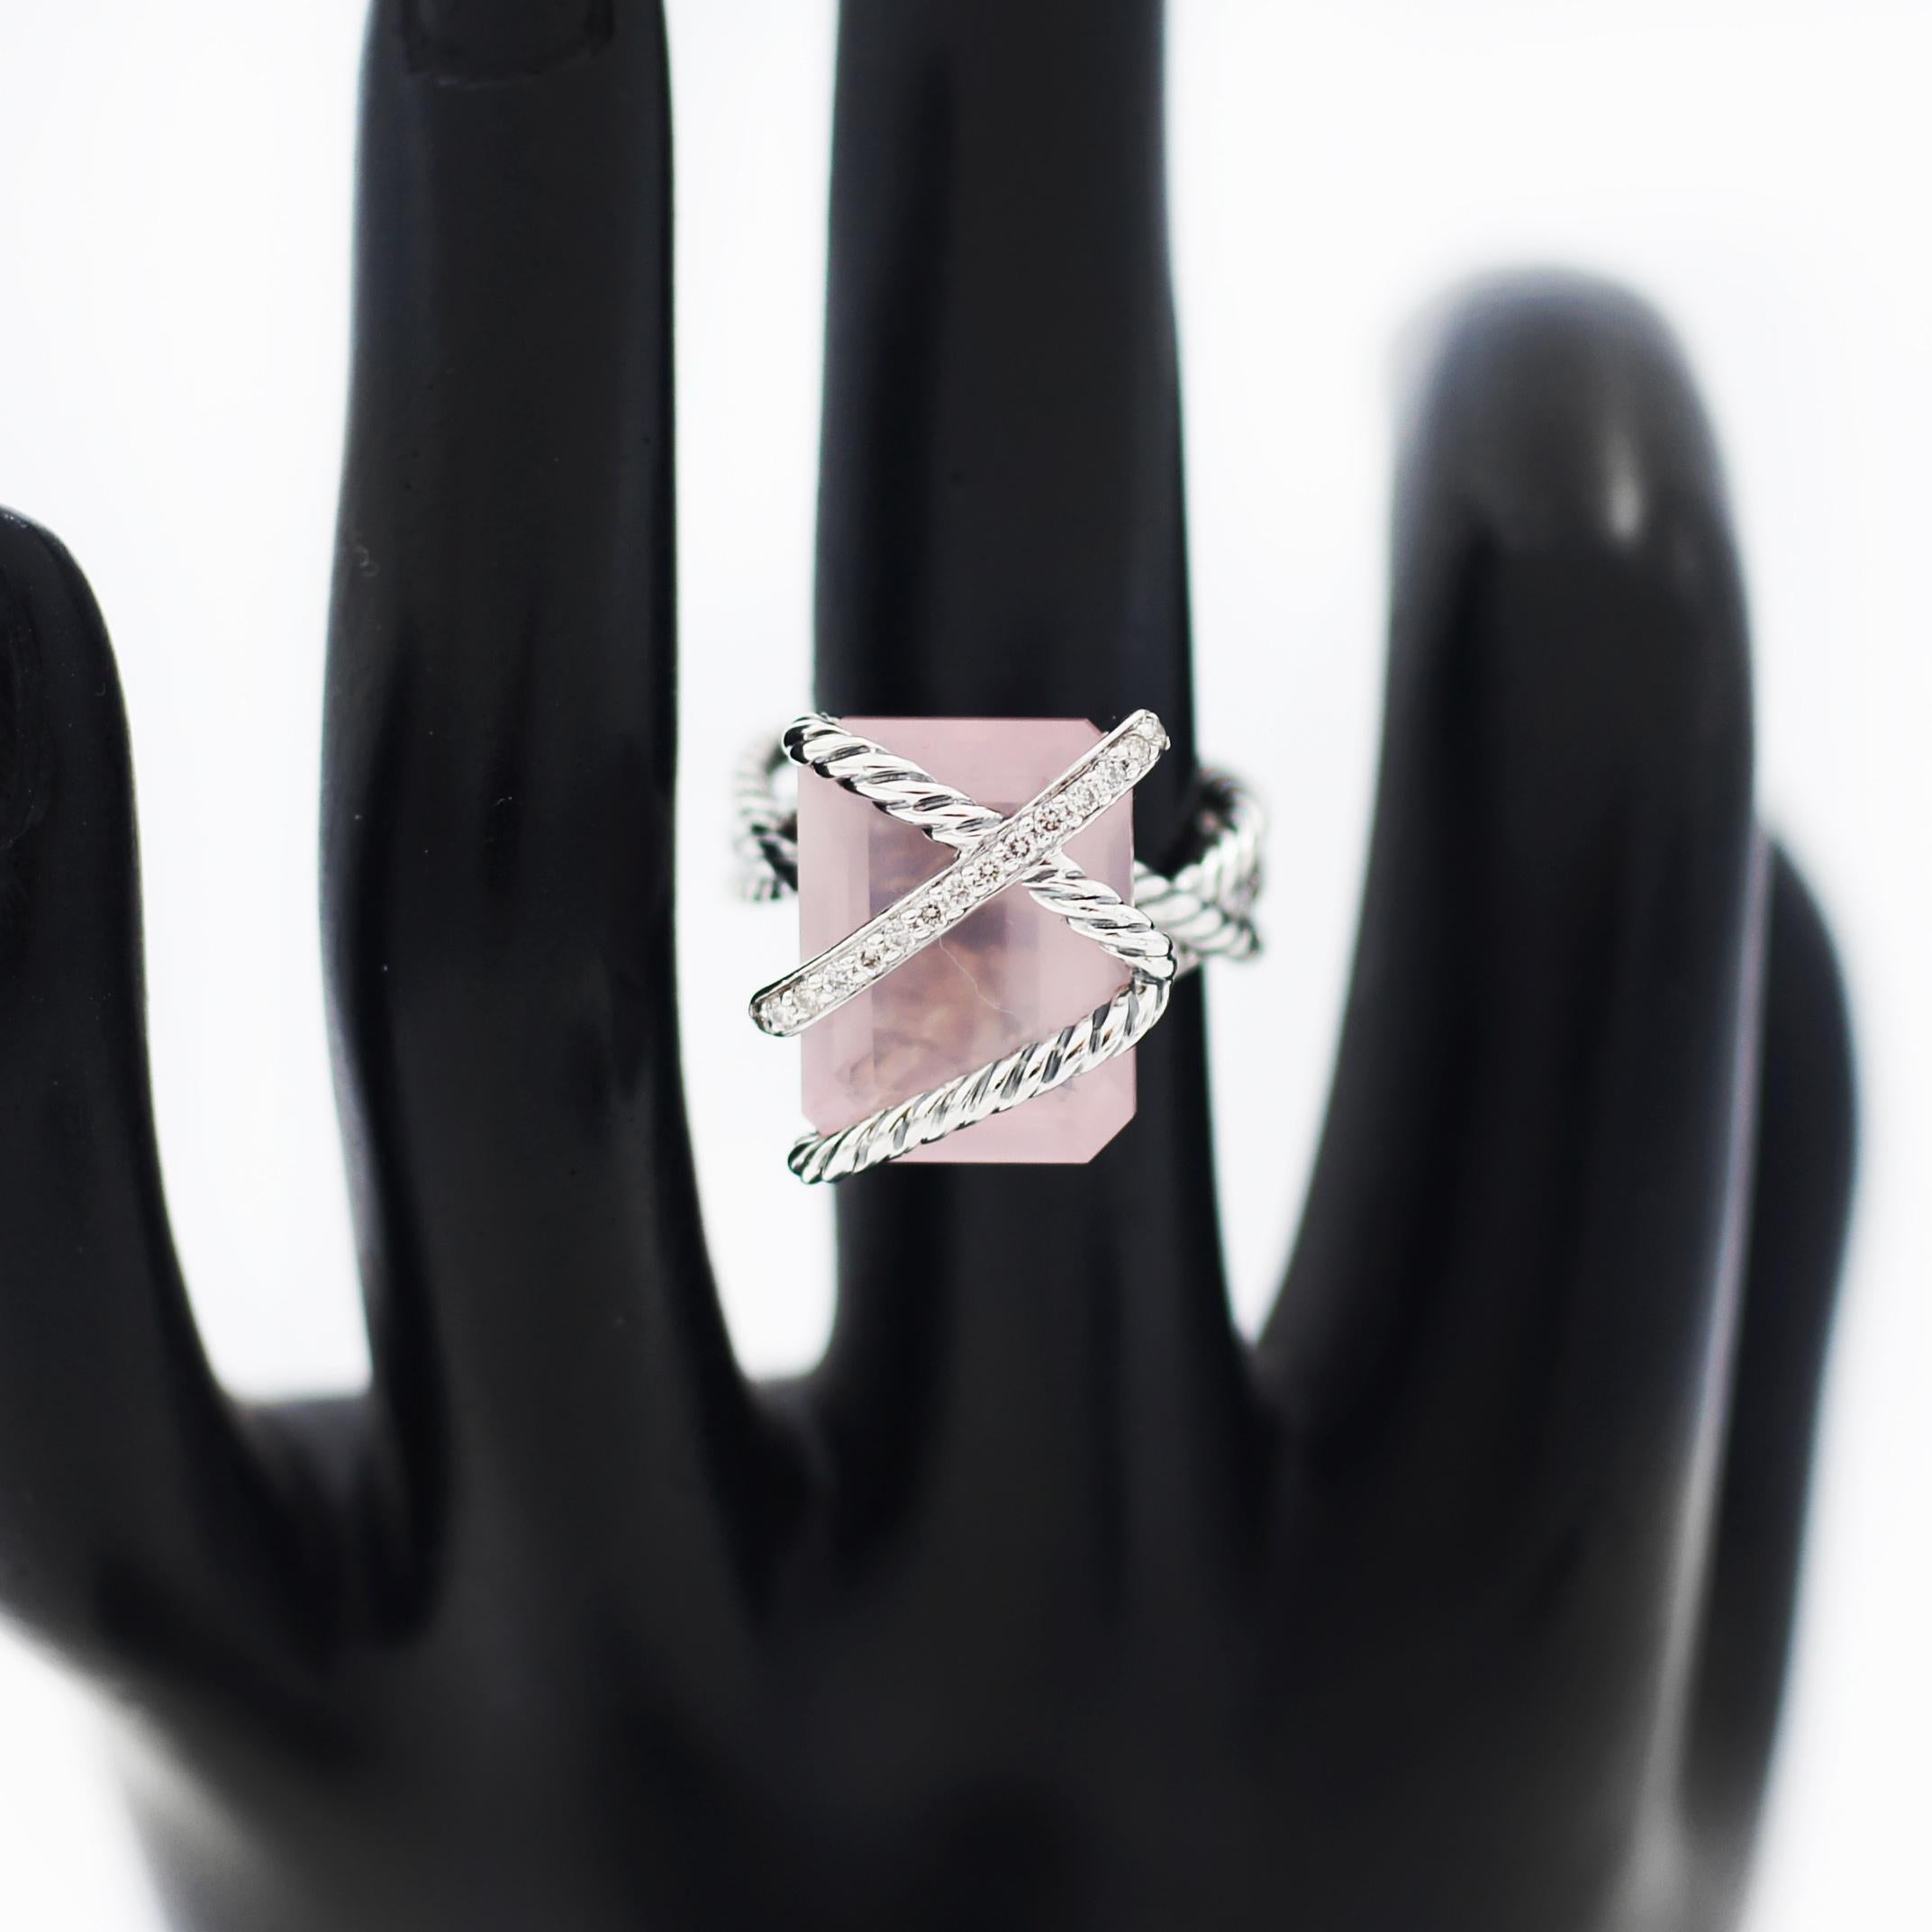 David Yurman
Cable Wrap Ring
This designs redefines how a gemstone is set, elegantly wrapping the stone with strands of Cable instead of prongs or a bezel.
925 Sterling silver
Approx. 9.40 Carat Faceted Rectangular Rose Quartz
Pavé-set